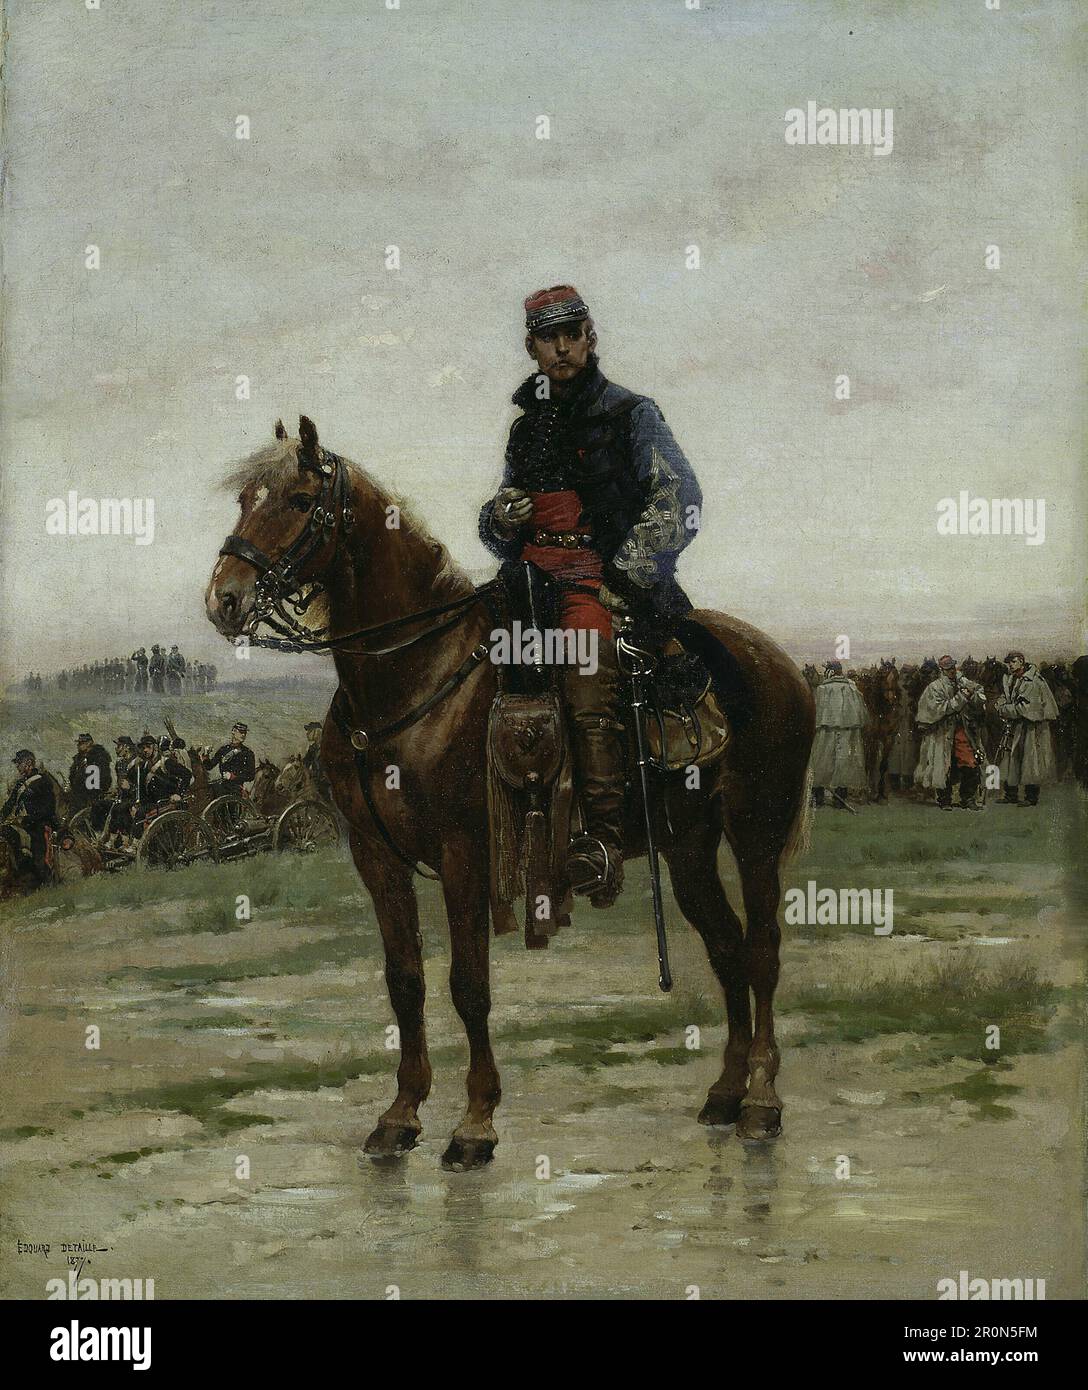 A Mounted Officer Date: 1877 Artist: Jean Baptiste Edouard Detaille French, 1848-1912 Stock Photo